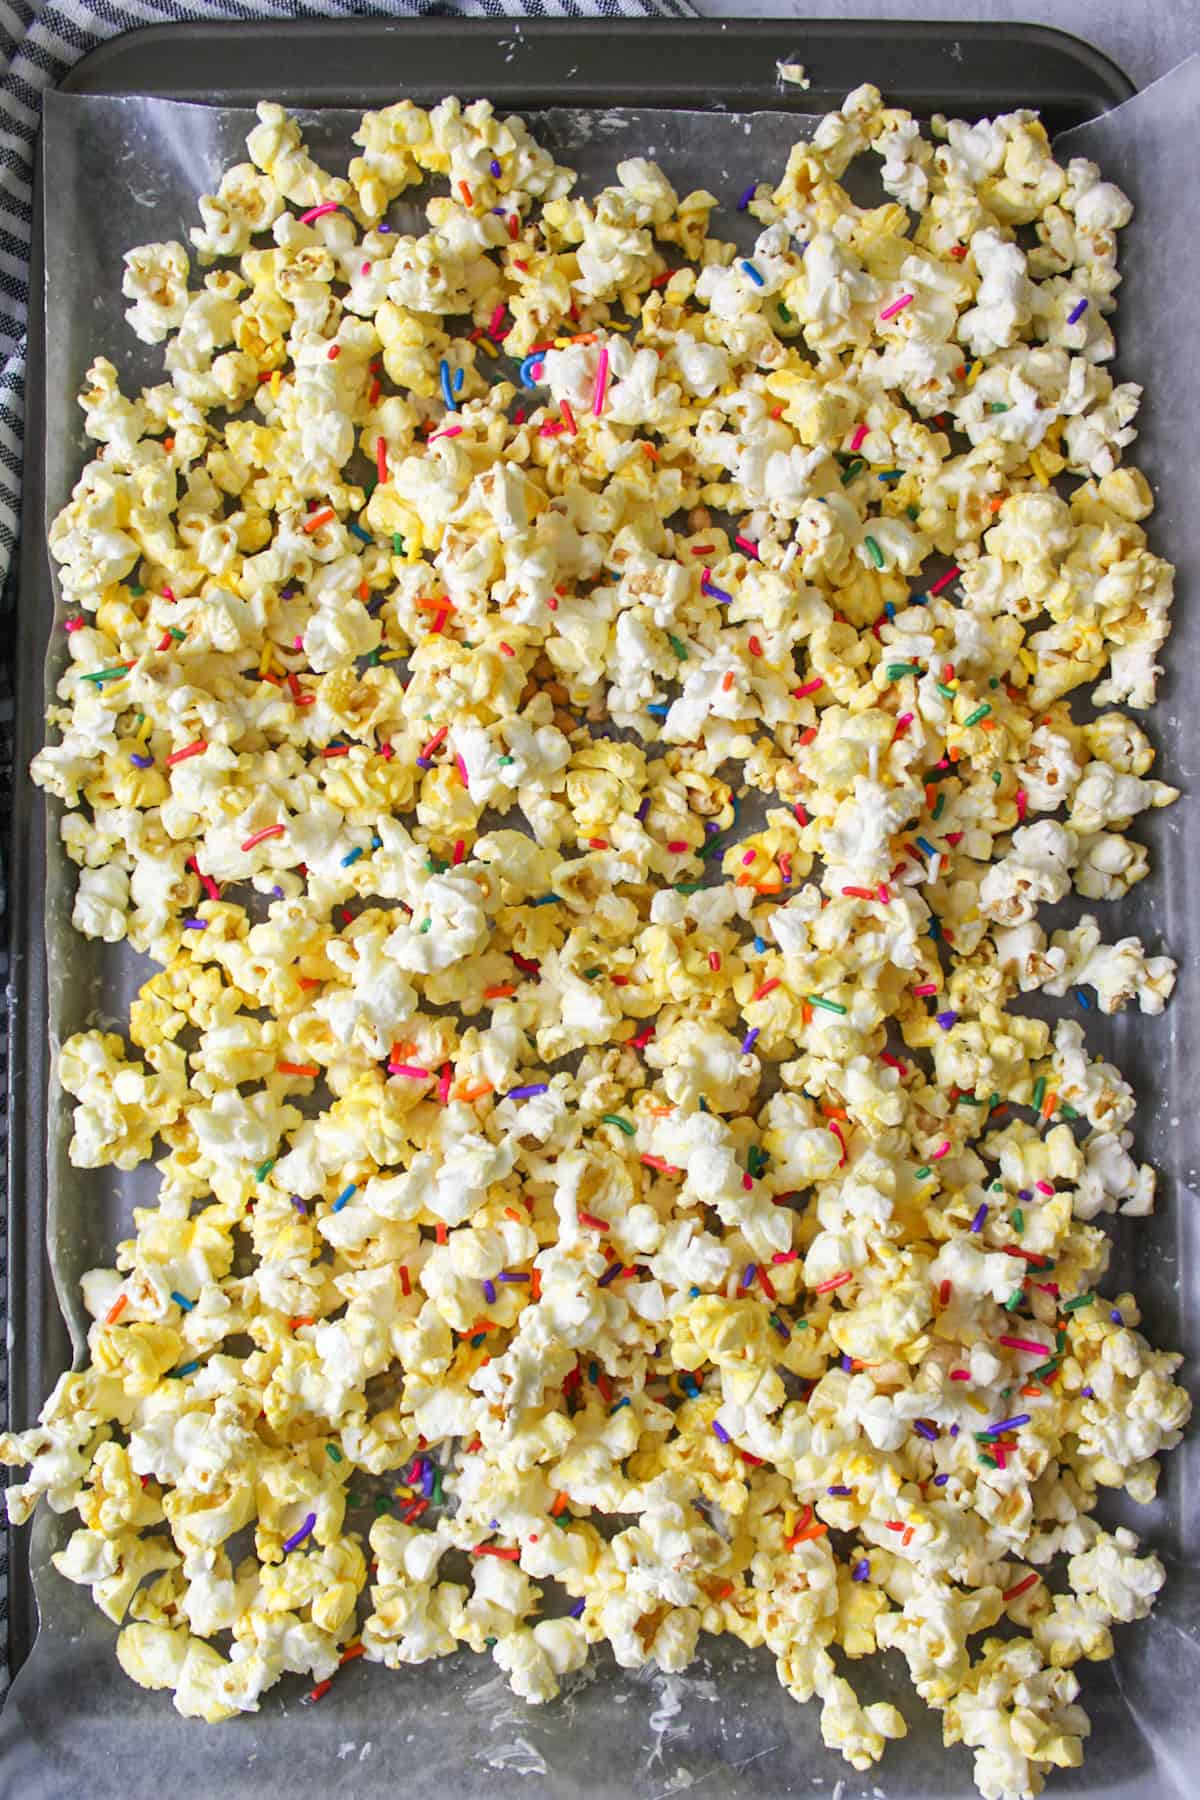 sprinkles on top of almond bark coated popcorn on wax paper covered baking sheet.